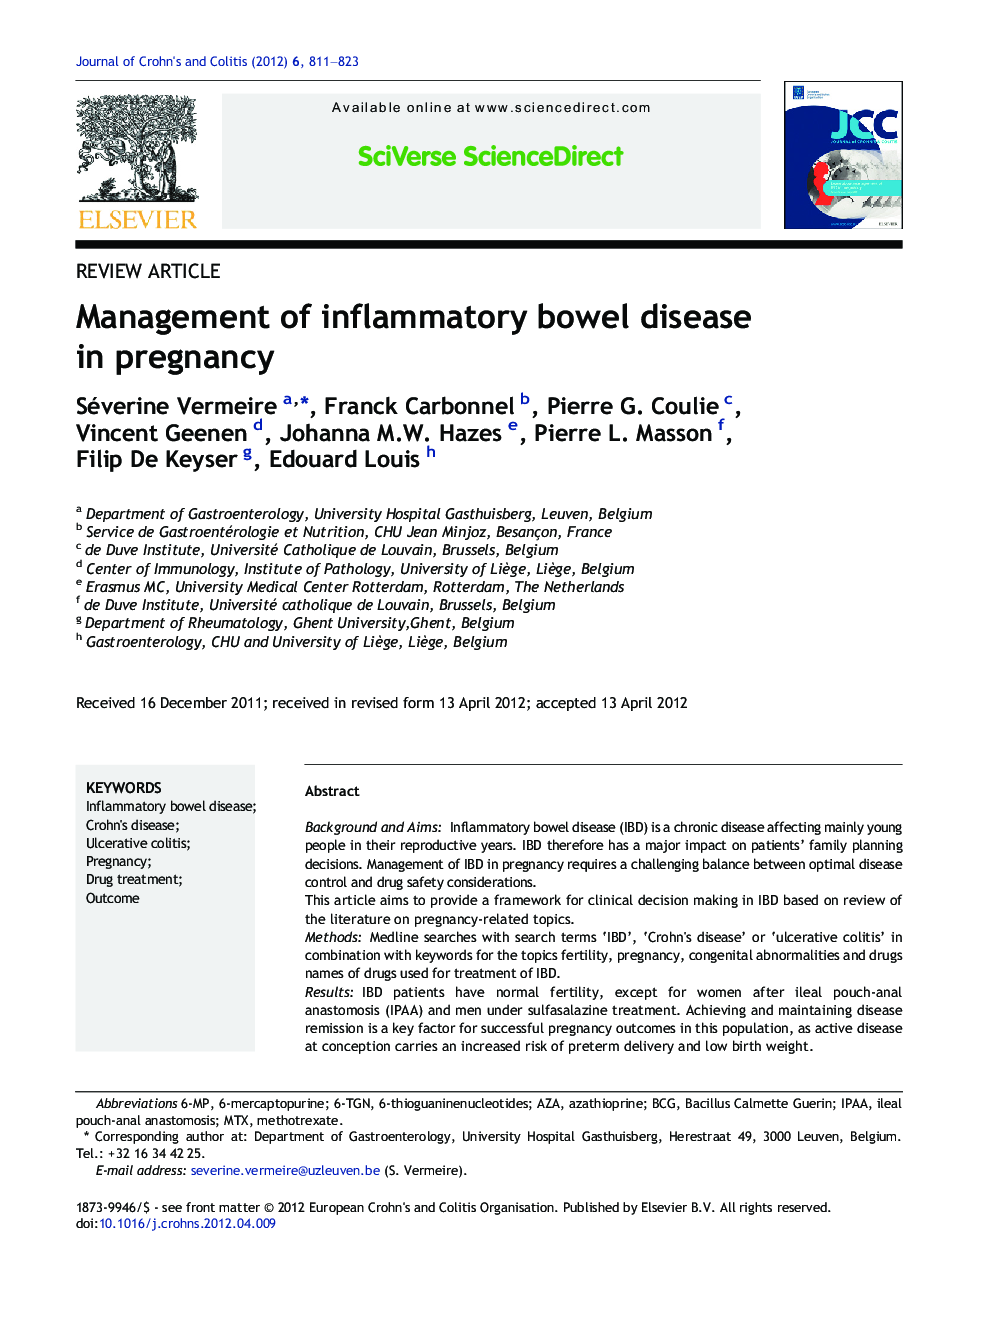 Review ArticleManagement of inflammatory bowel disease in pregnancy